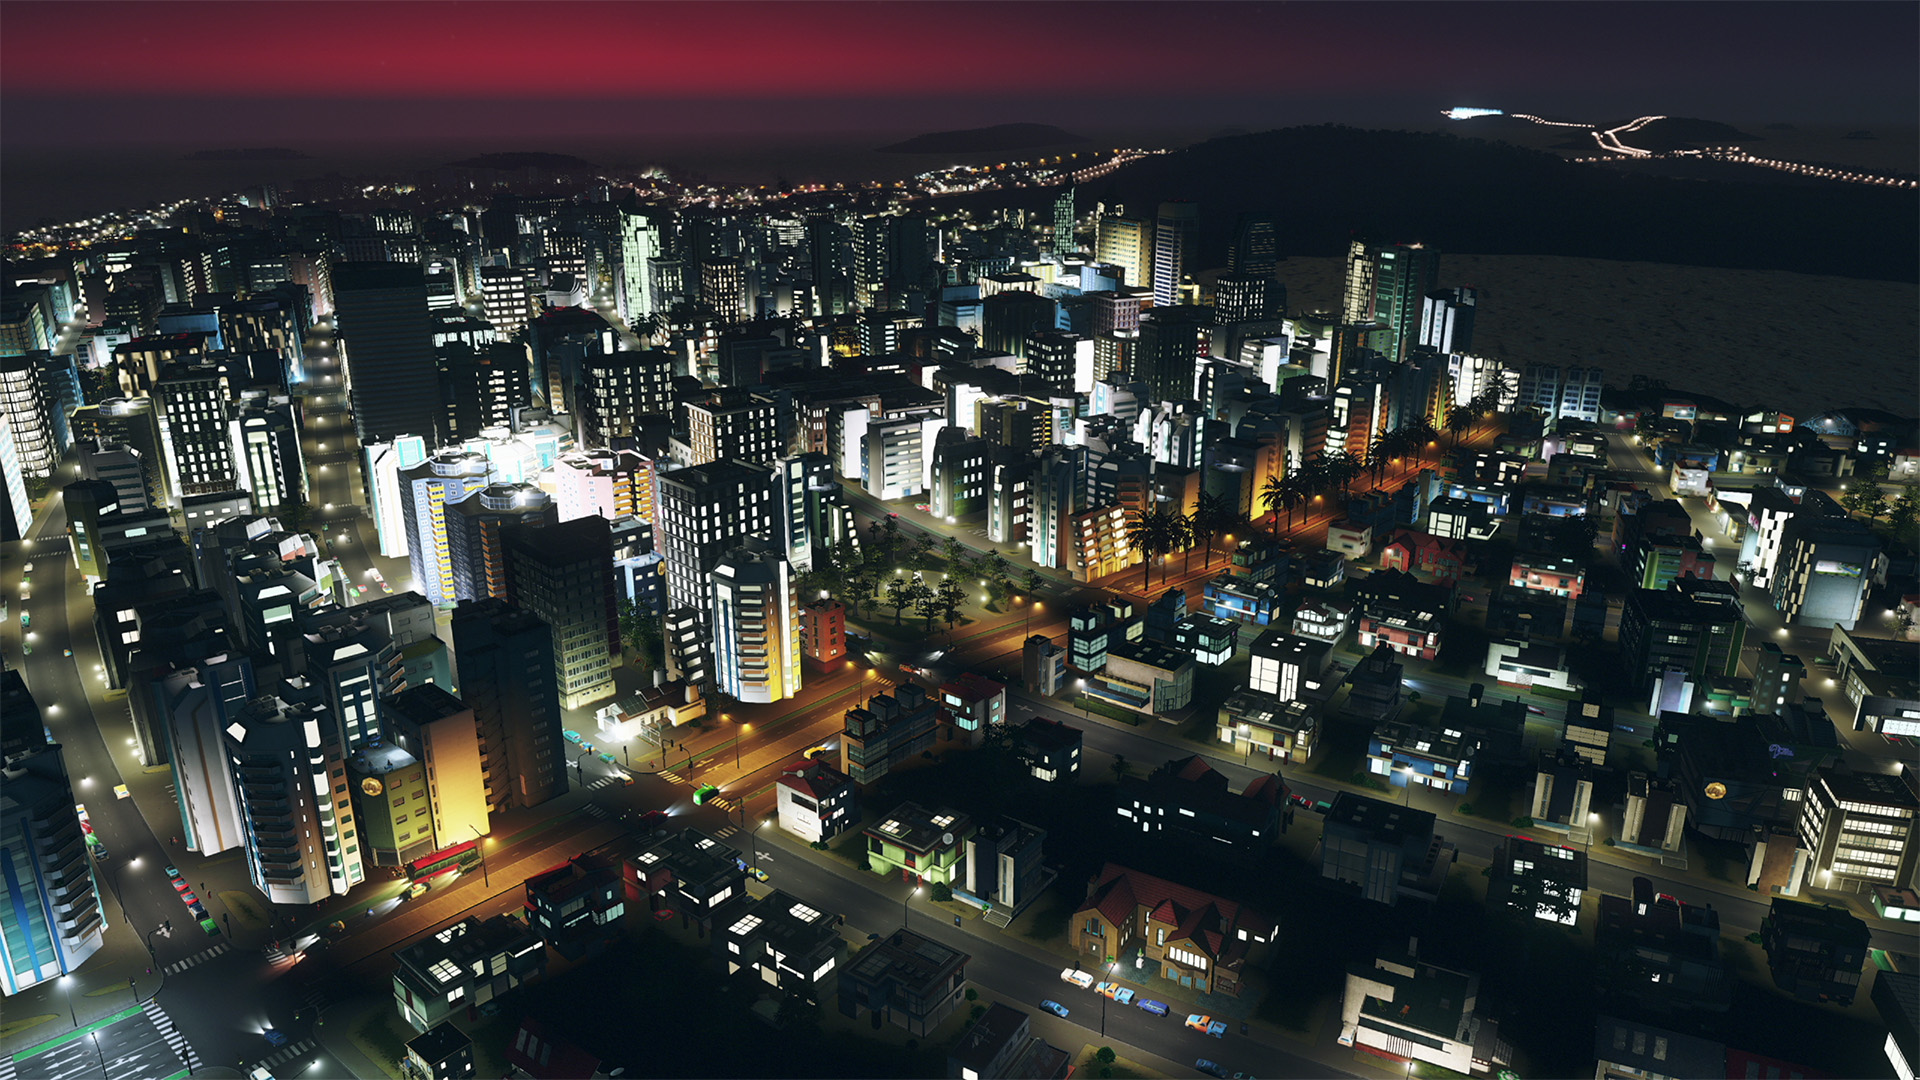 Cities Skylines 2 publisher warns the city builder may run poorly at